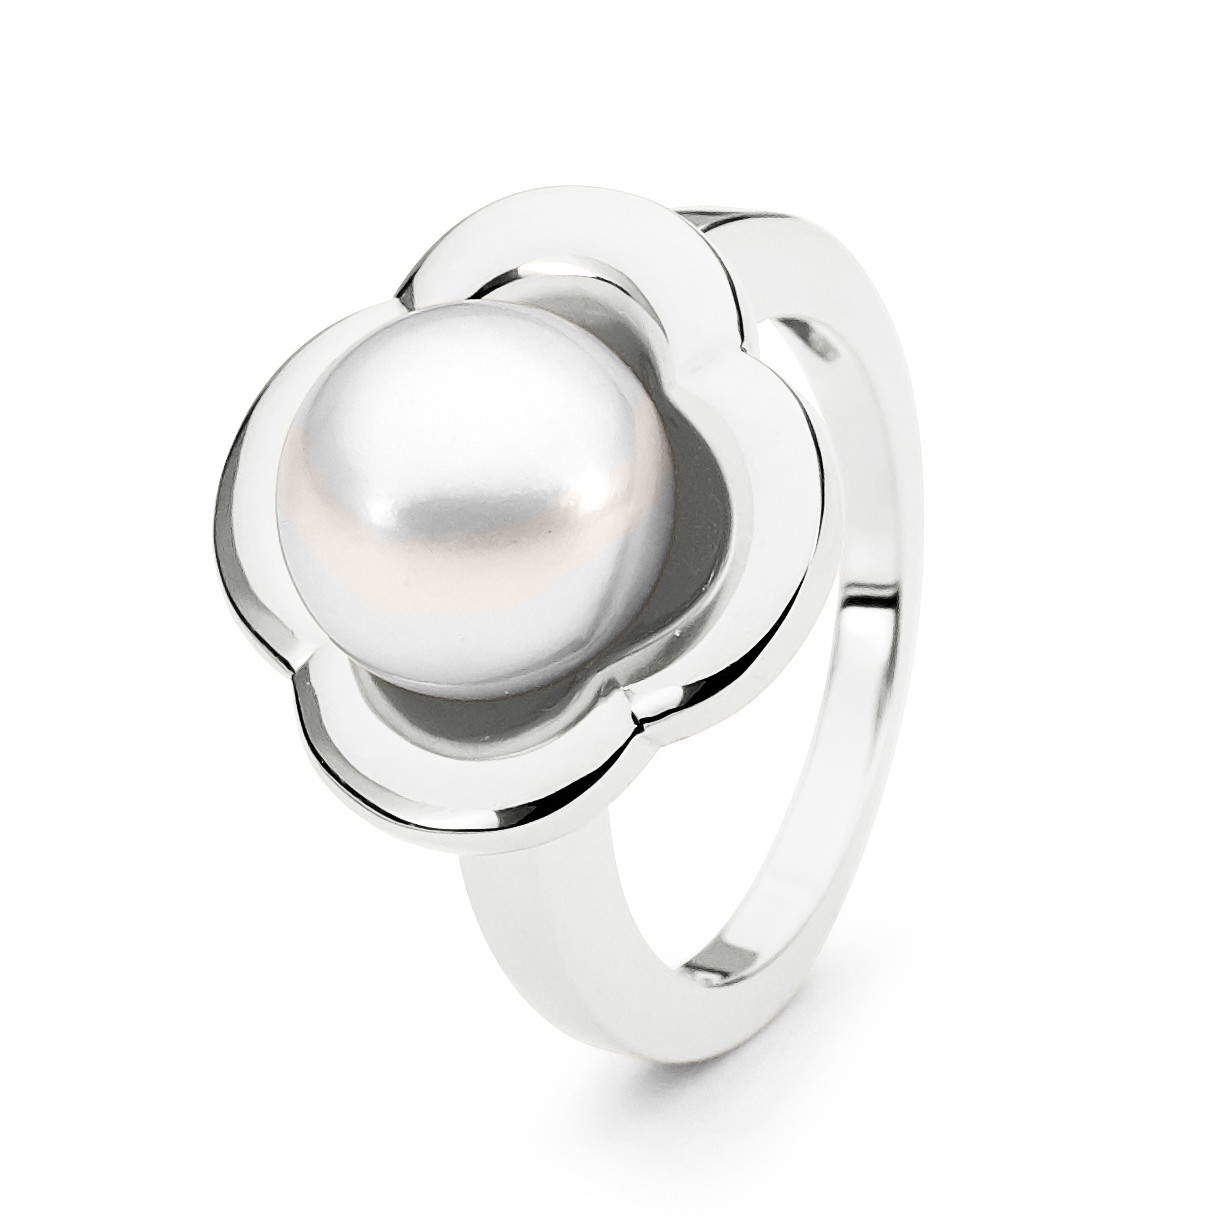 Four Leaf Clover Pearl Ring - Allure South Sea Pearls